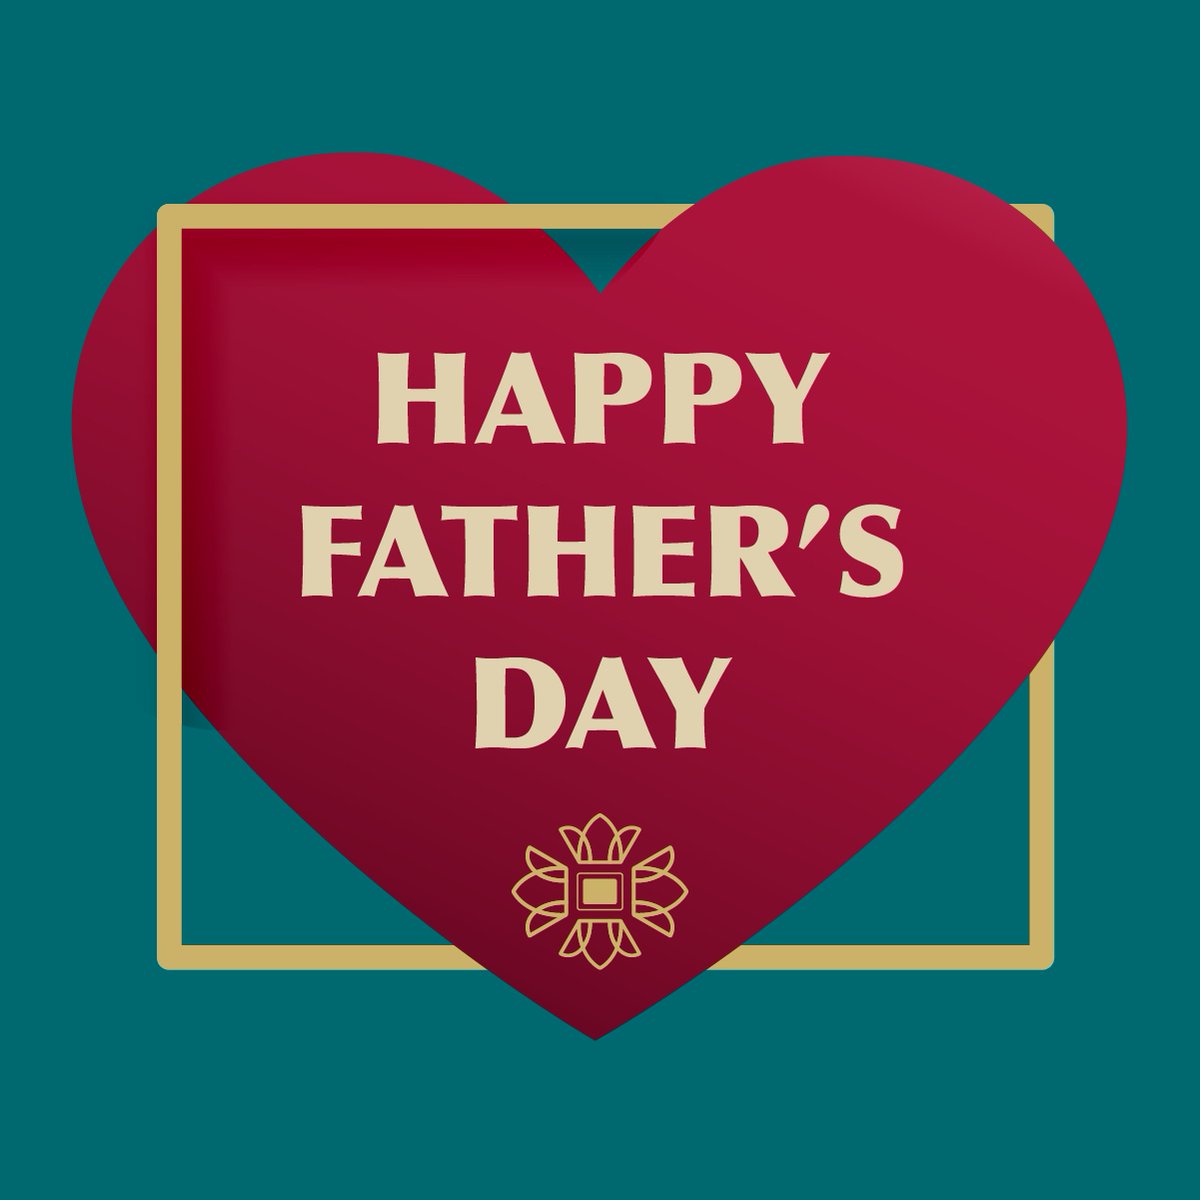 We’d like to wish all of the dads out there a Happy Father’s Day! We hope everyone enjoys the holiday! ❤️

#prestigehcg #prestigeproud #prestigestrong #snf #skillednursing #skillednursingfacility #healthcare #fathersday